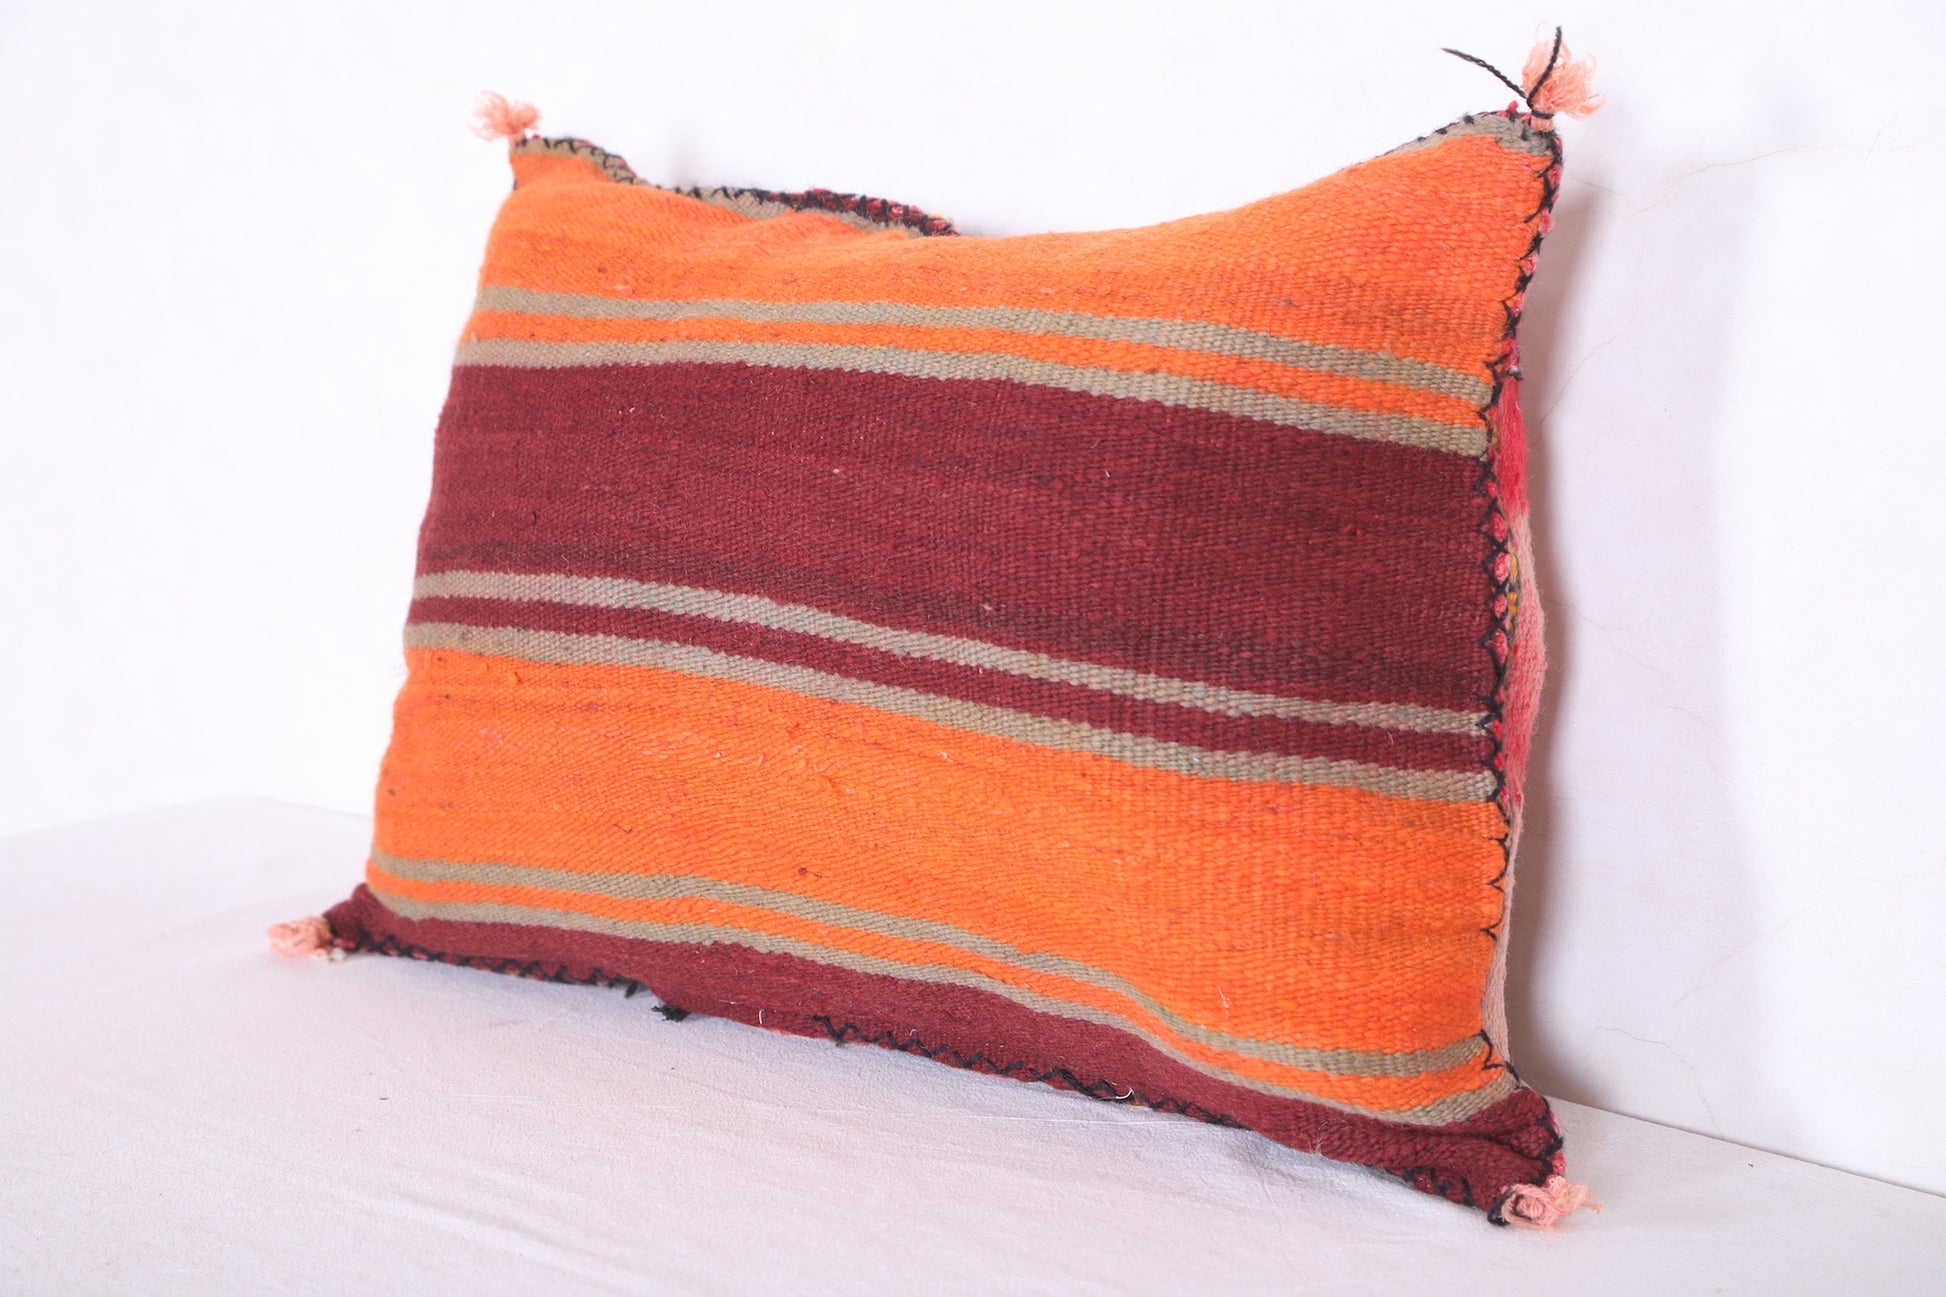 Moroccan handmade kilim pillow 16.9 INCHES X 22.8 INCHES